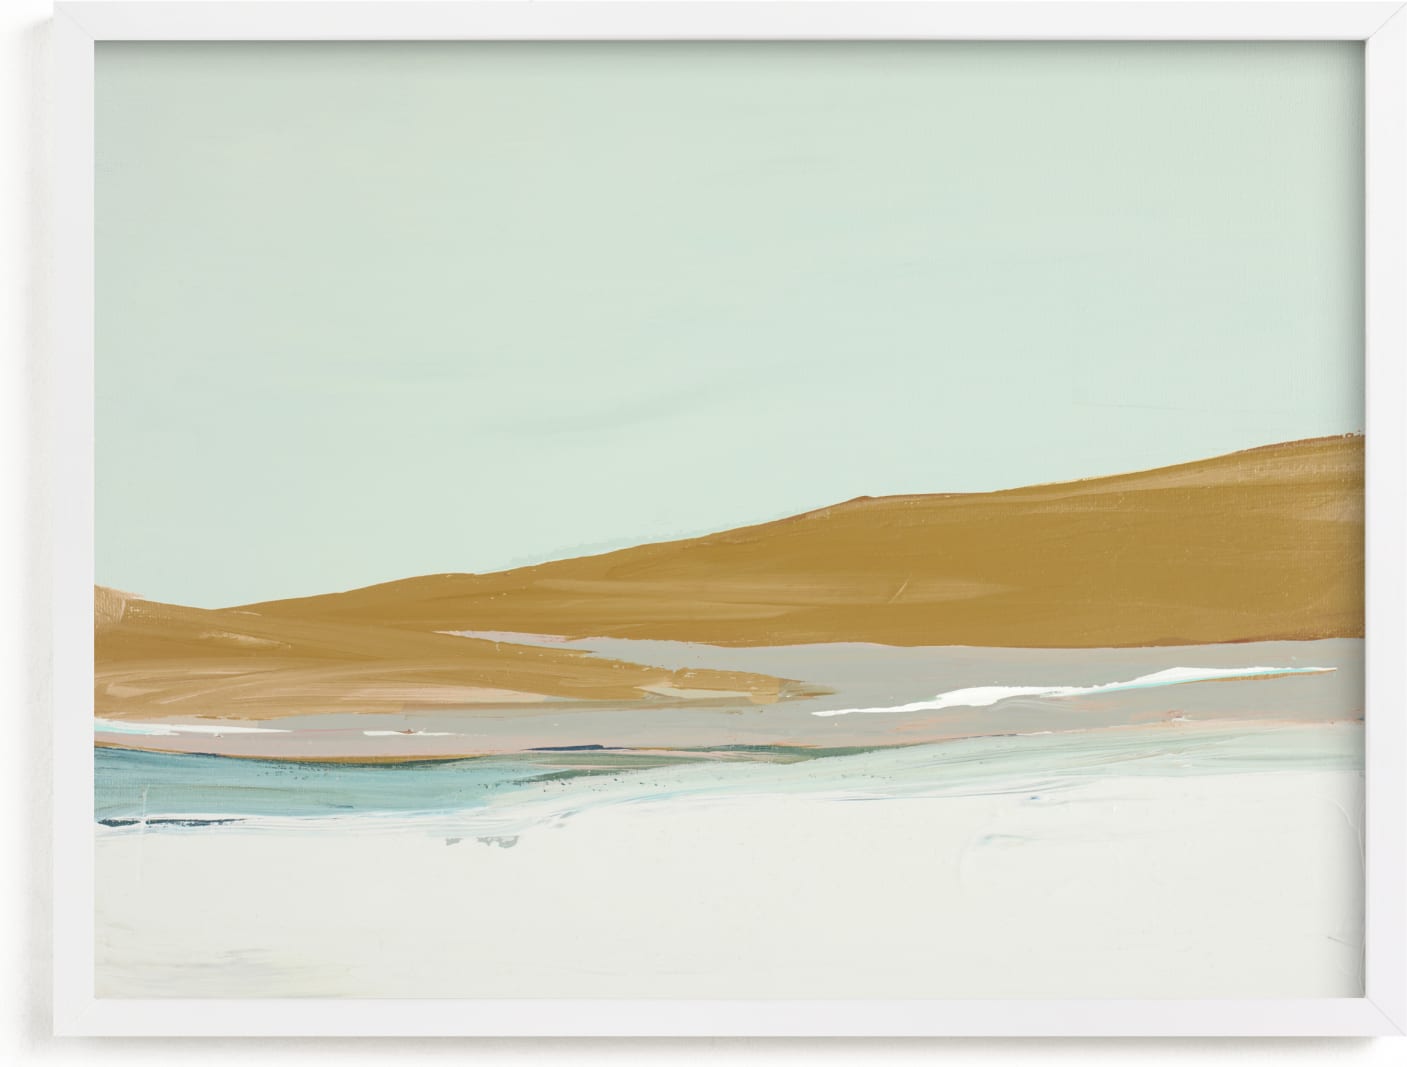 This is a white art by Caryn Owen called Sand Dunes.